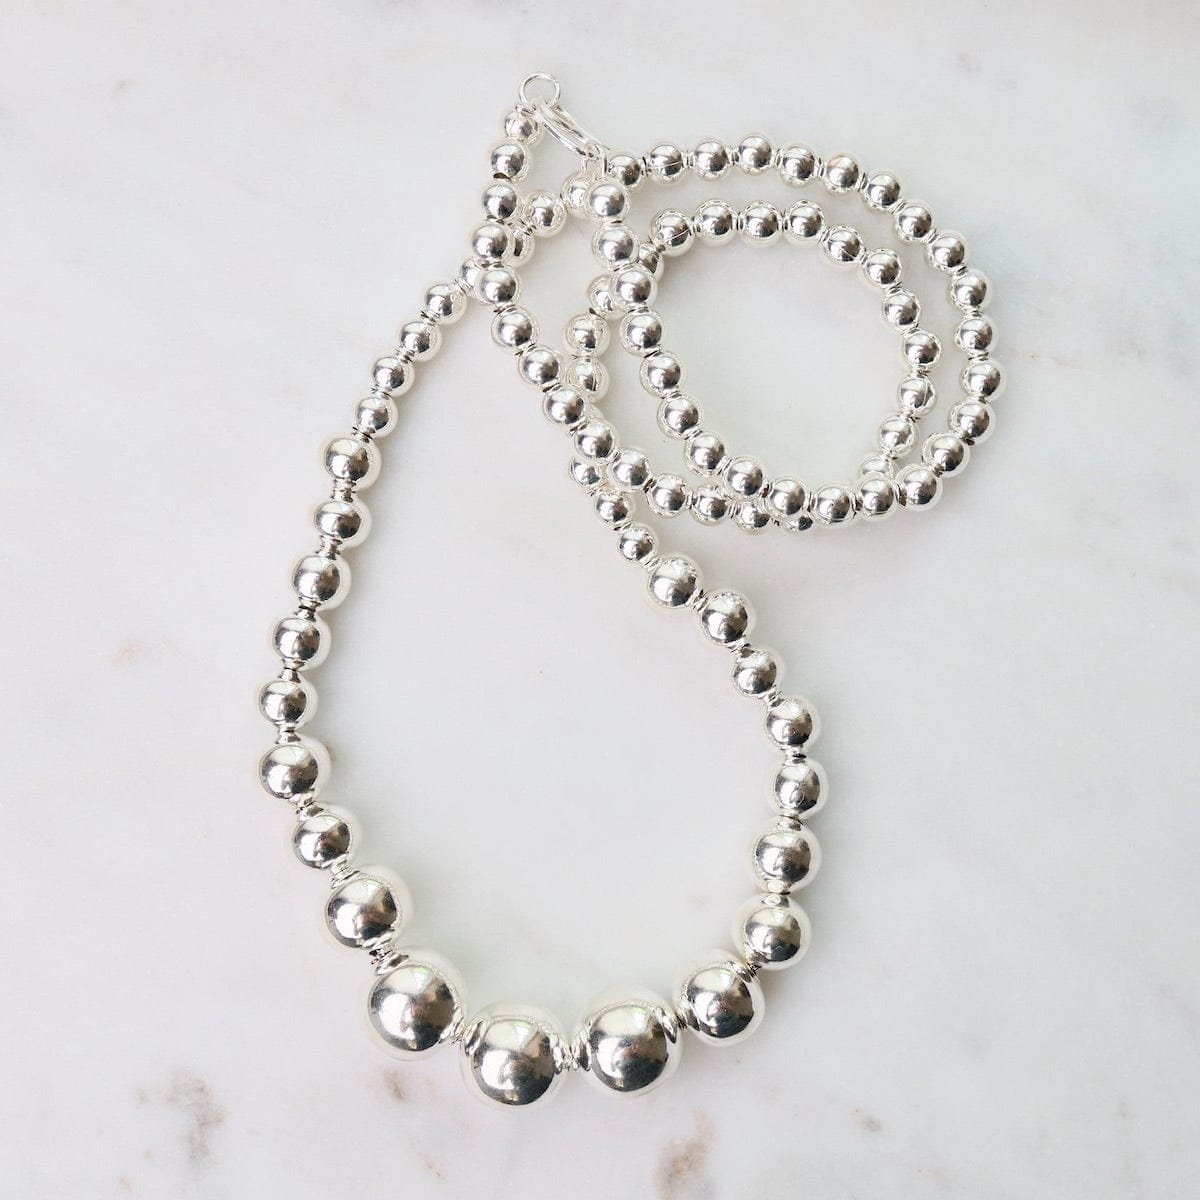 Large 9.5mm STAINLESS STEEL Ball Chain Necklaces / Bracelets ~ Round #20  Bead | eBay